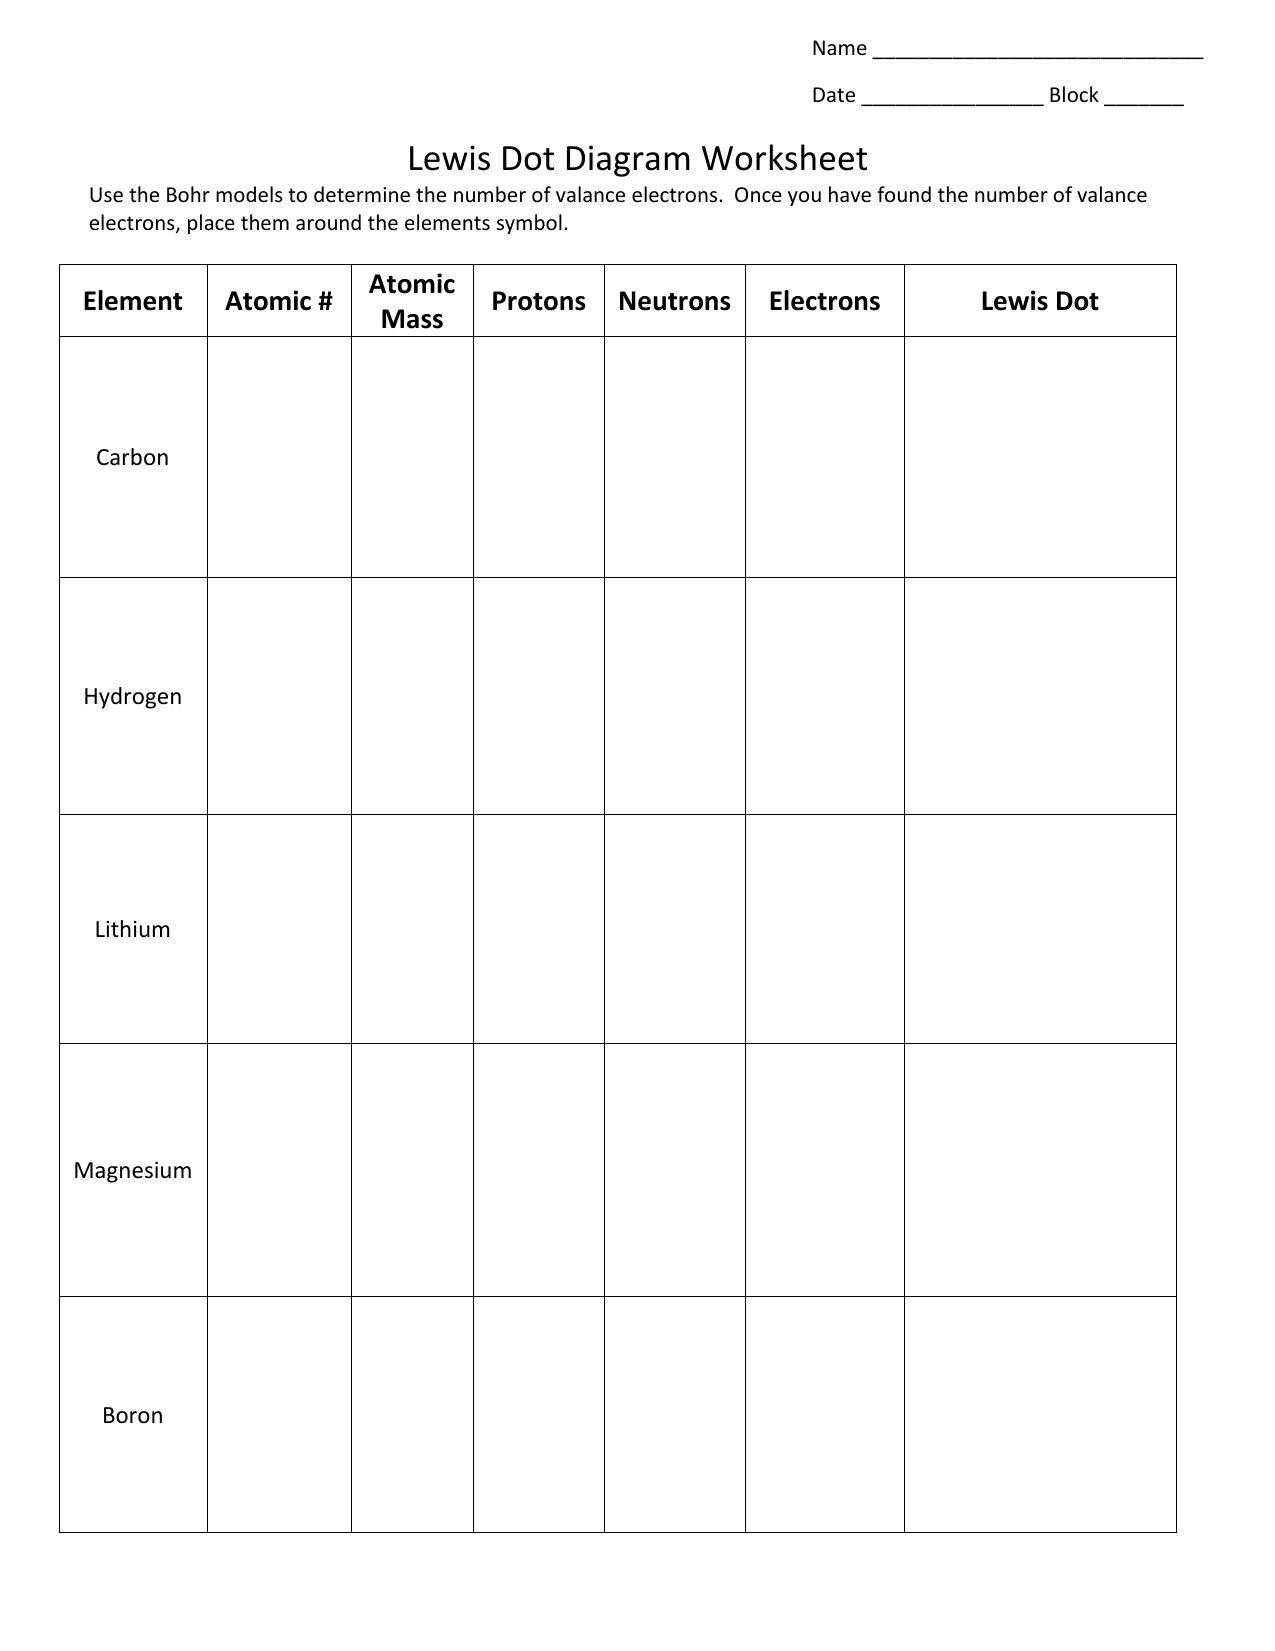 Lewis-dot-diagram-worksheet - with answers Throughout Lewis Dot Diagram Worksheet